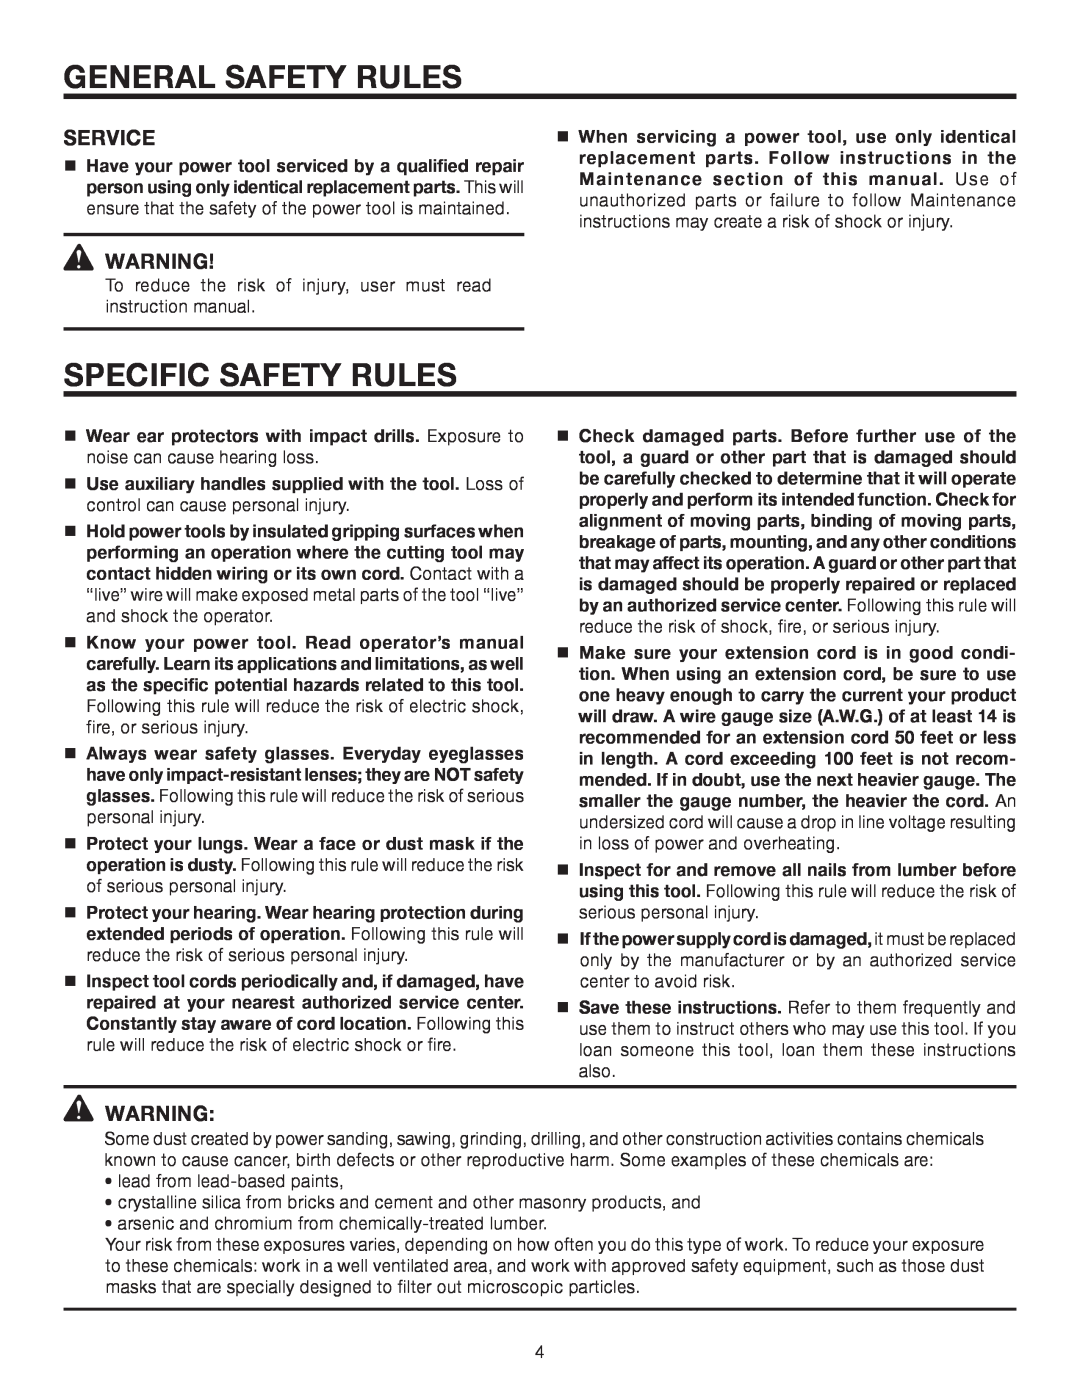 RIDGID R5013 manual Specific Safety Rules, General Safety Rules, Service 